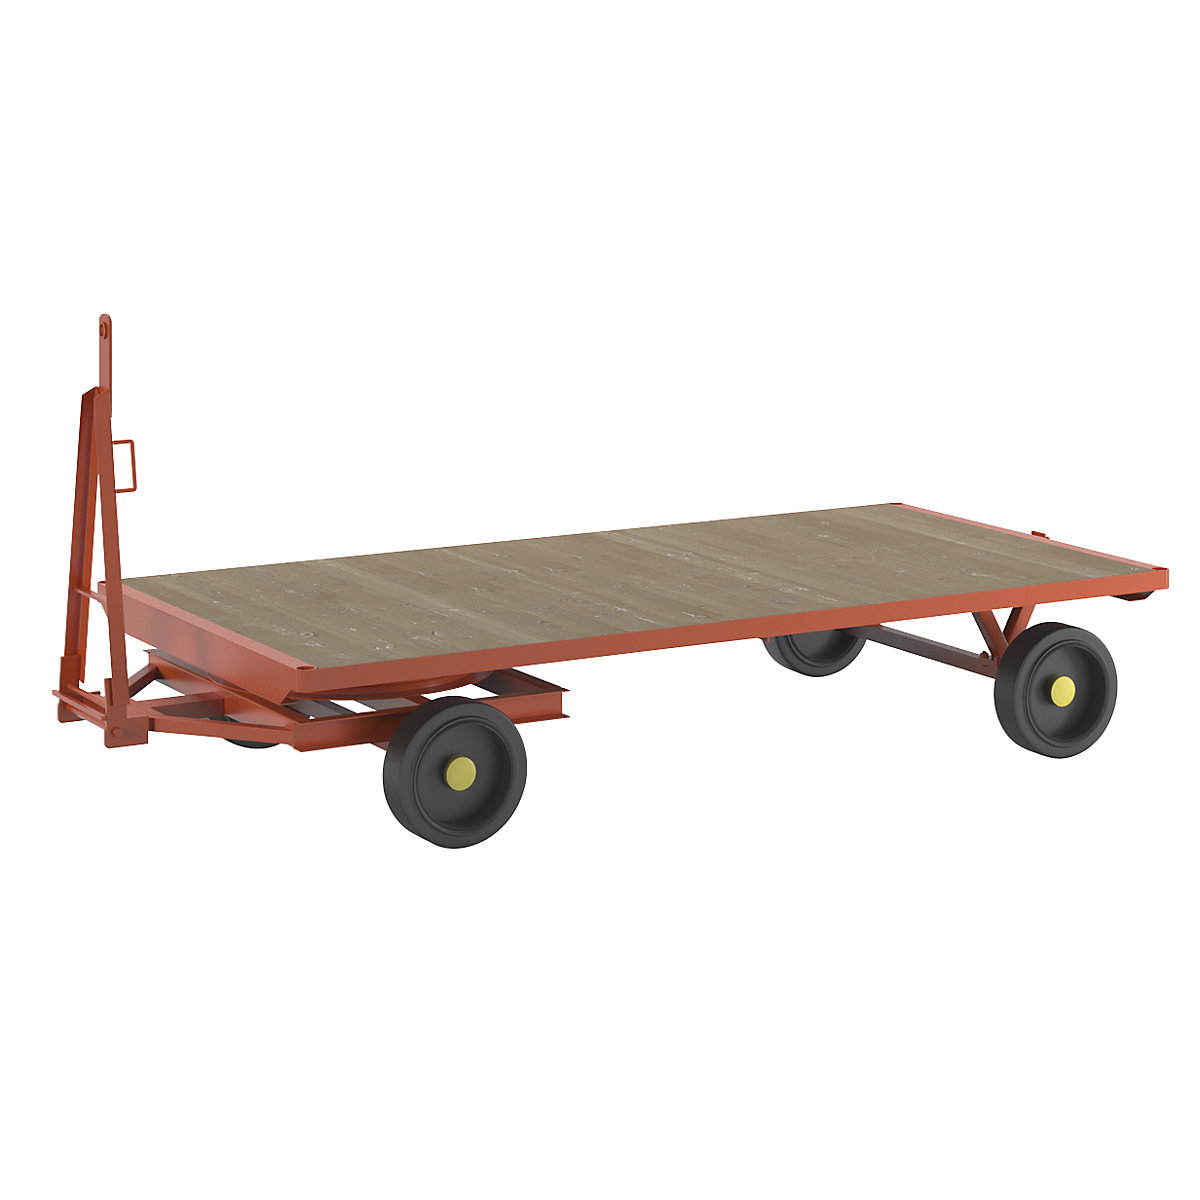 Trailer, 2-wheel turntable steering, max. load 5 t, platform 3.0 x 1.5 m, solid rubber tyres-13